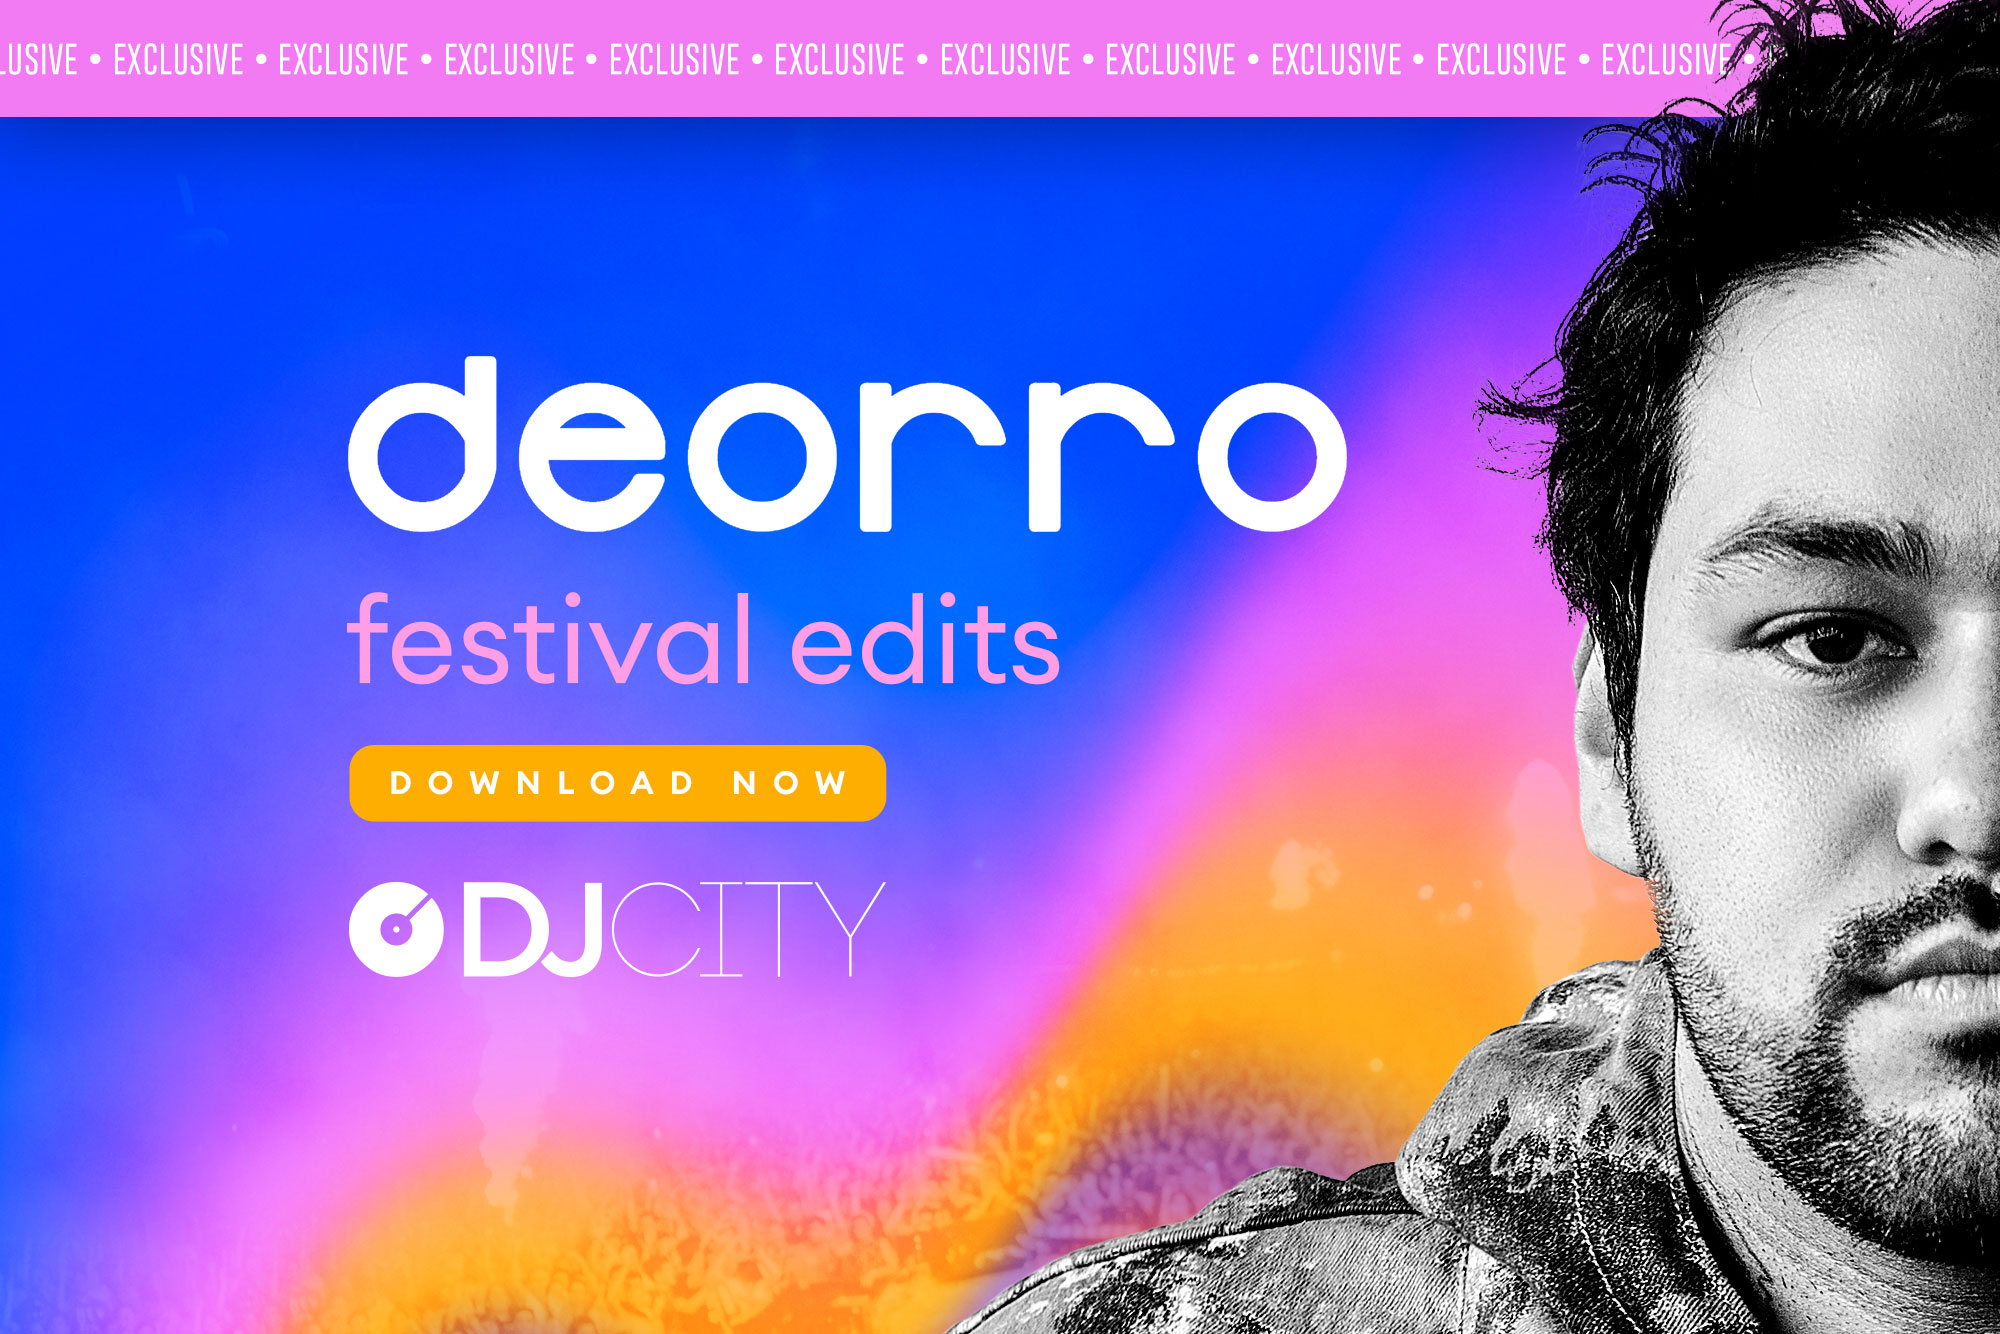 Deorro Releases Two Packs of Festival Edits Exclusively on DJcity